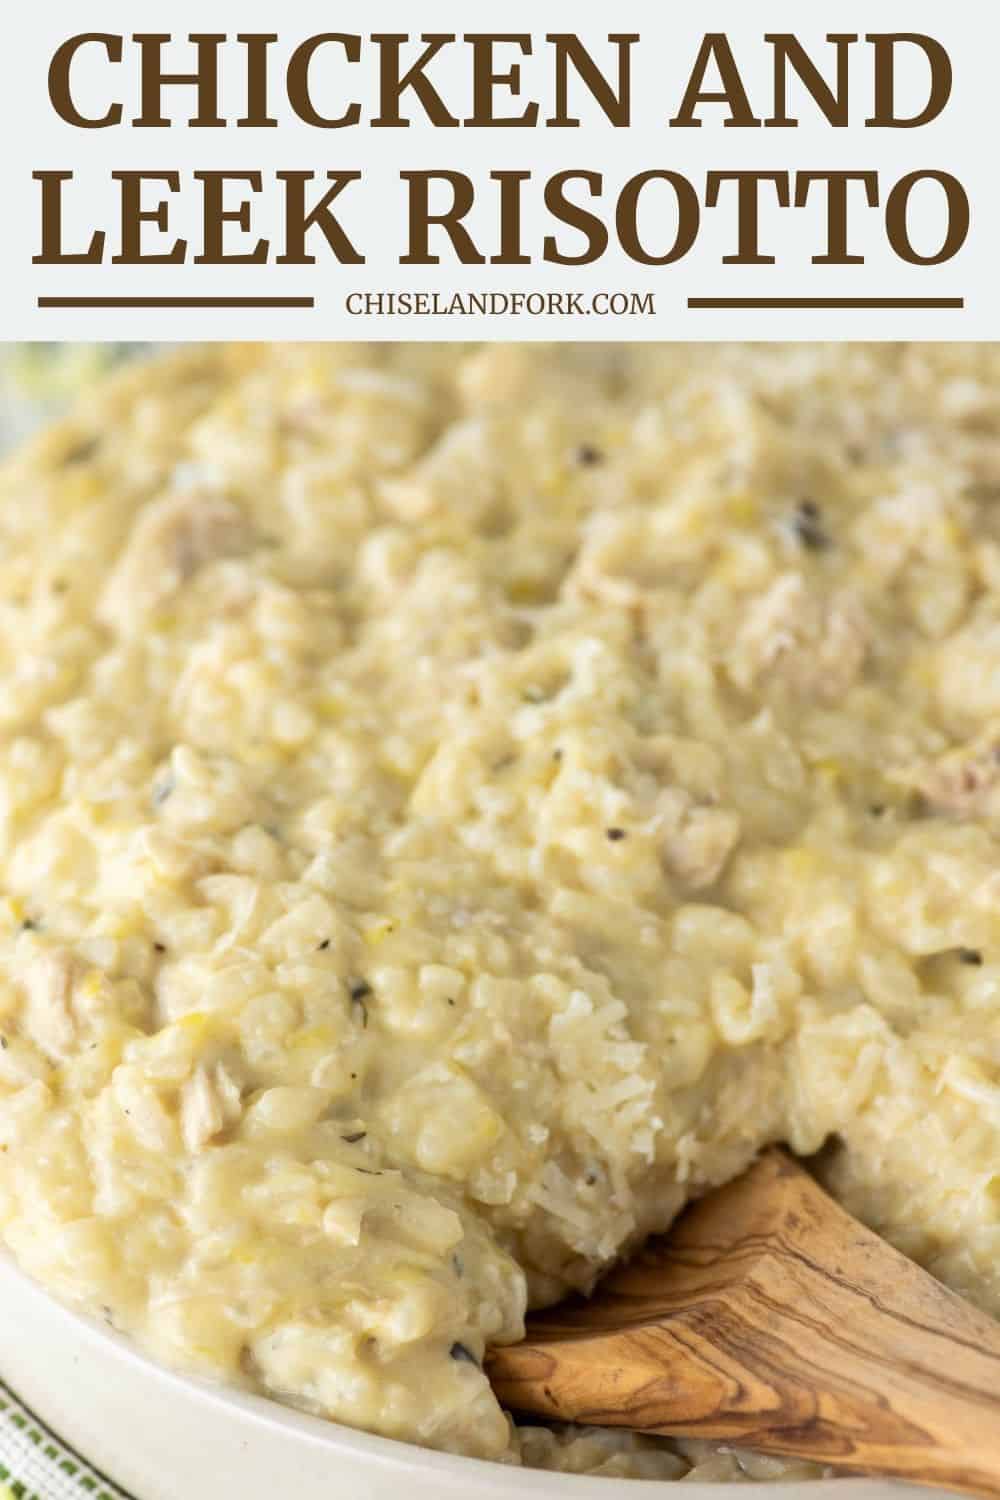 Chicken and Leek Risotto Recipe - Creamy and Delicious - Chisel & Fork